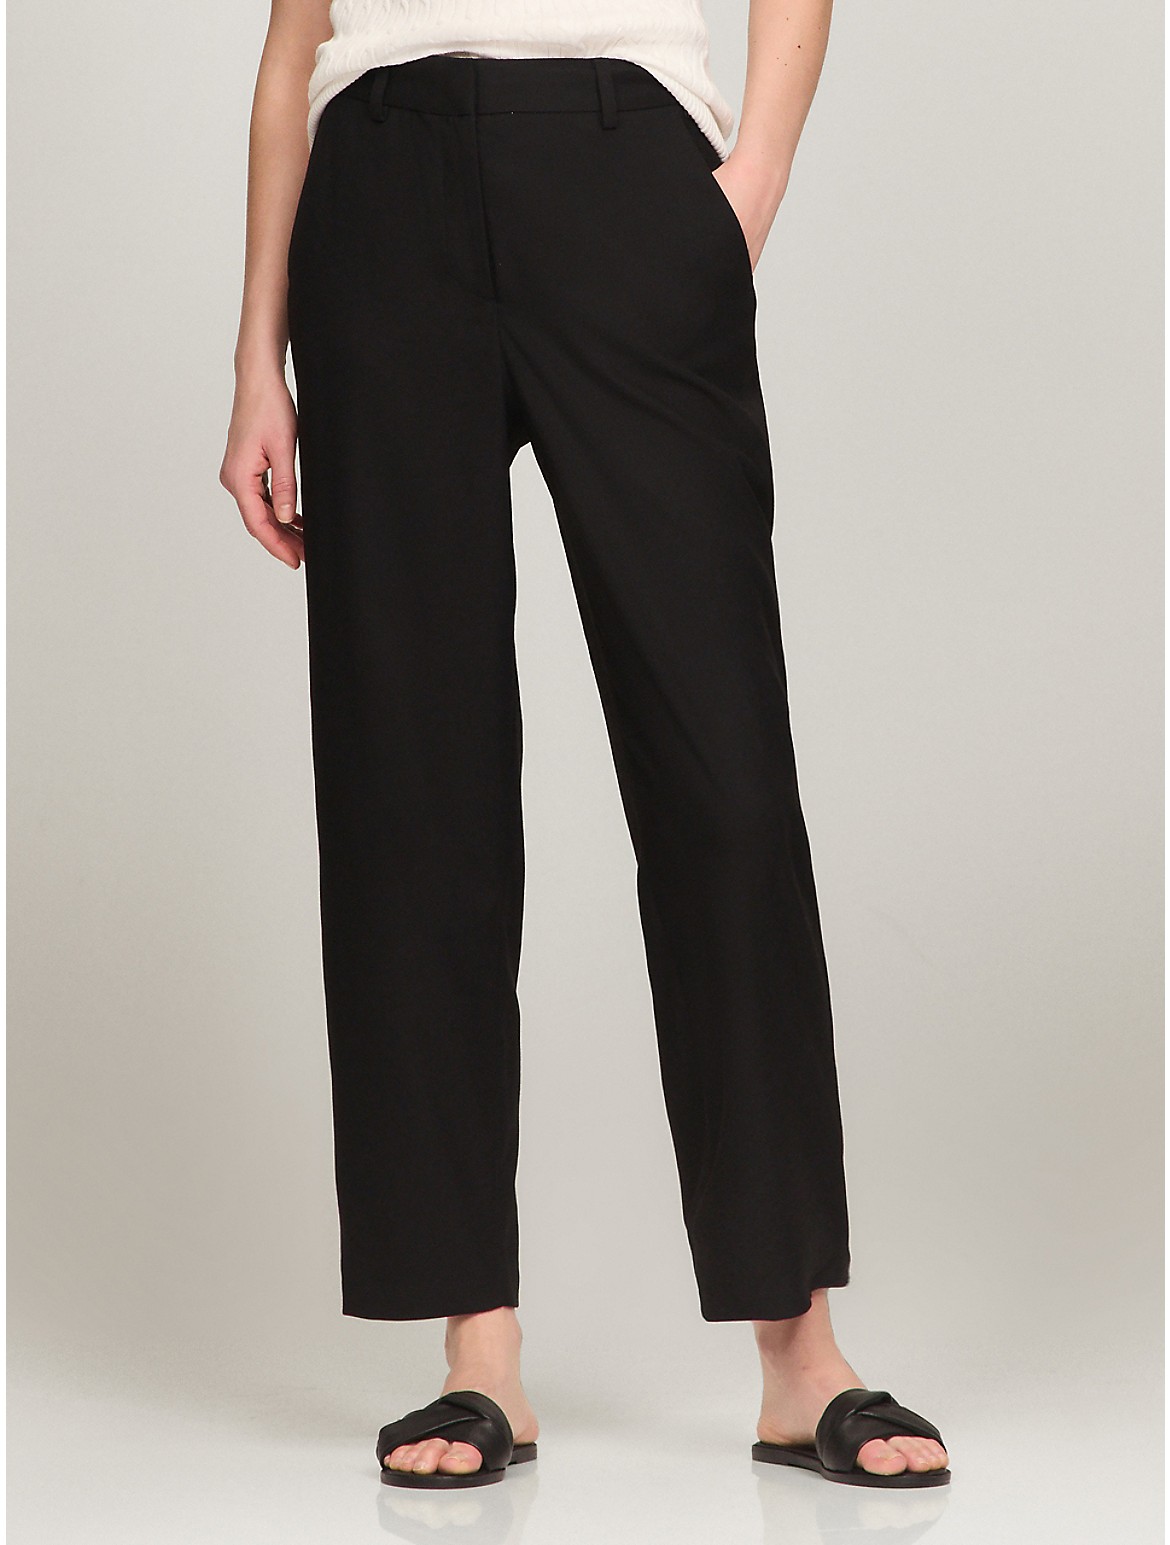 Tommy Hilfiger Women's Tapered Fit Pant - Black - 00